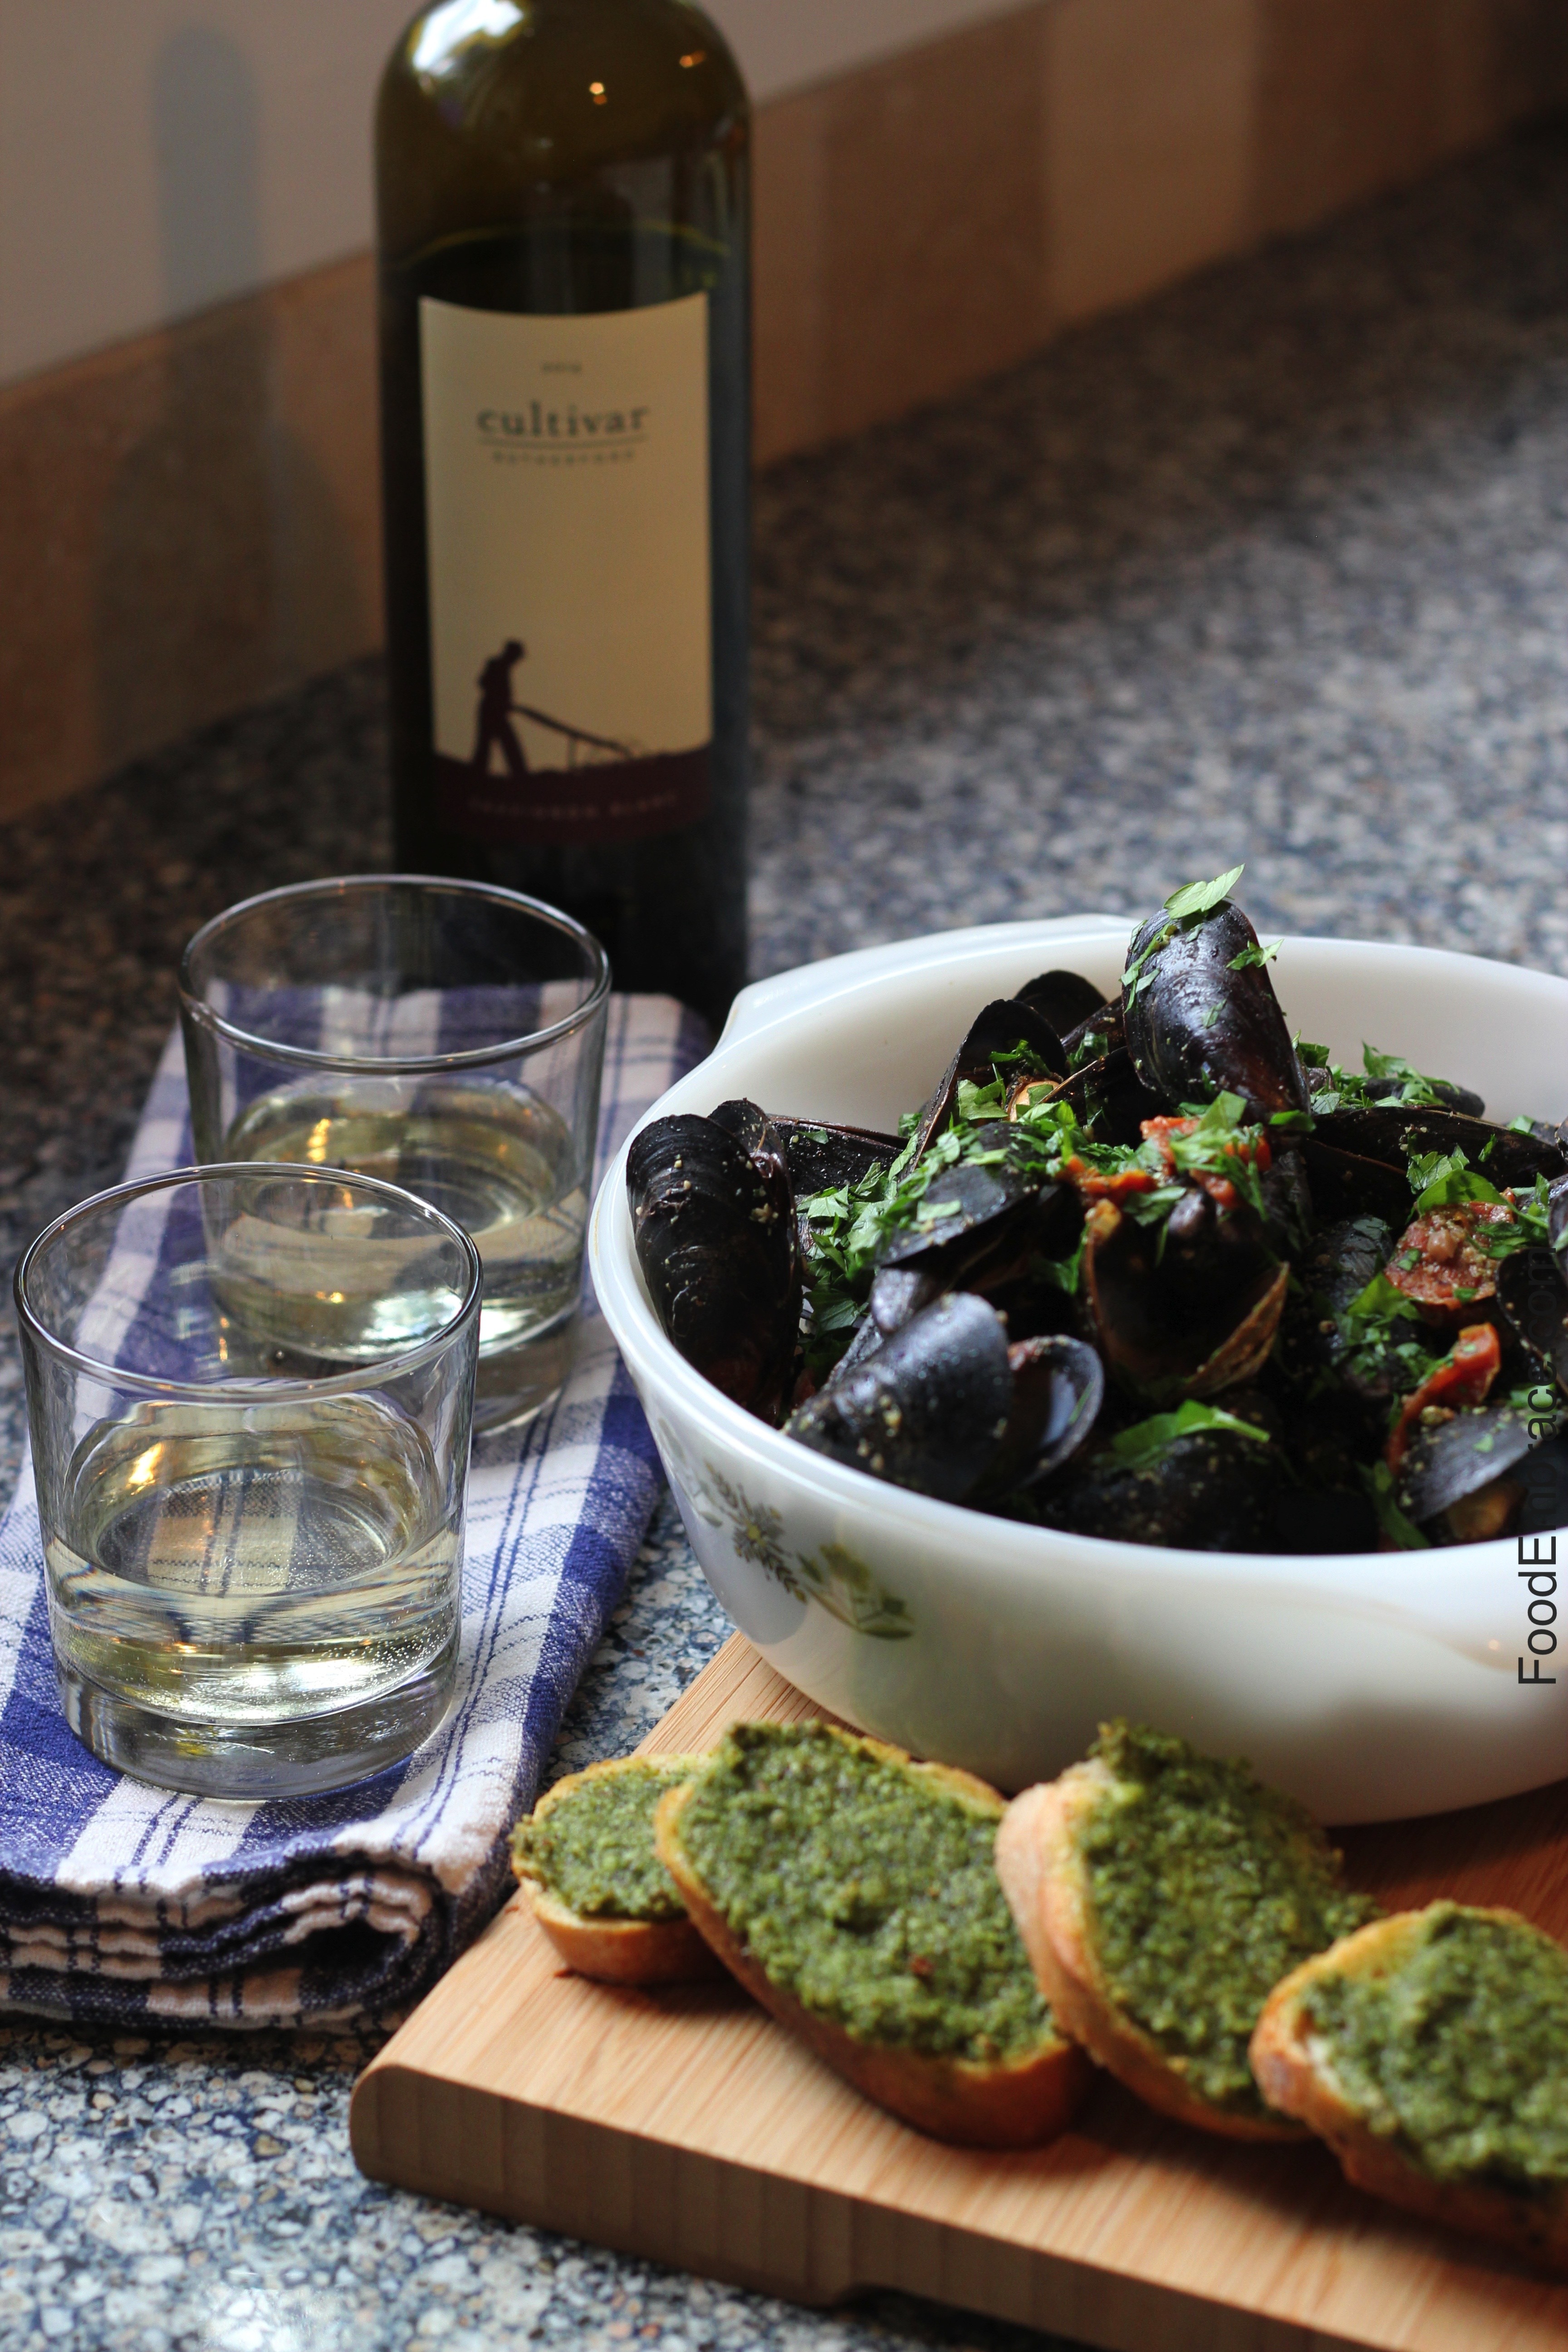 Mussels with 2014 Cultivar Rutherford Sauvignon Blanc